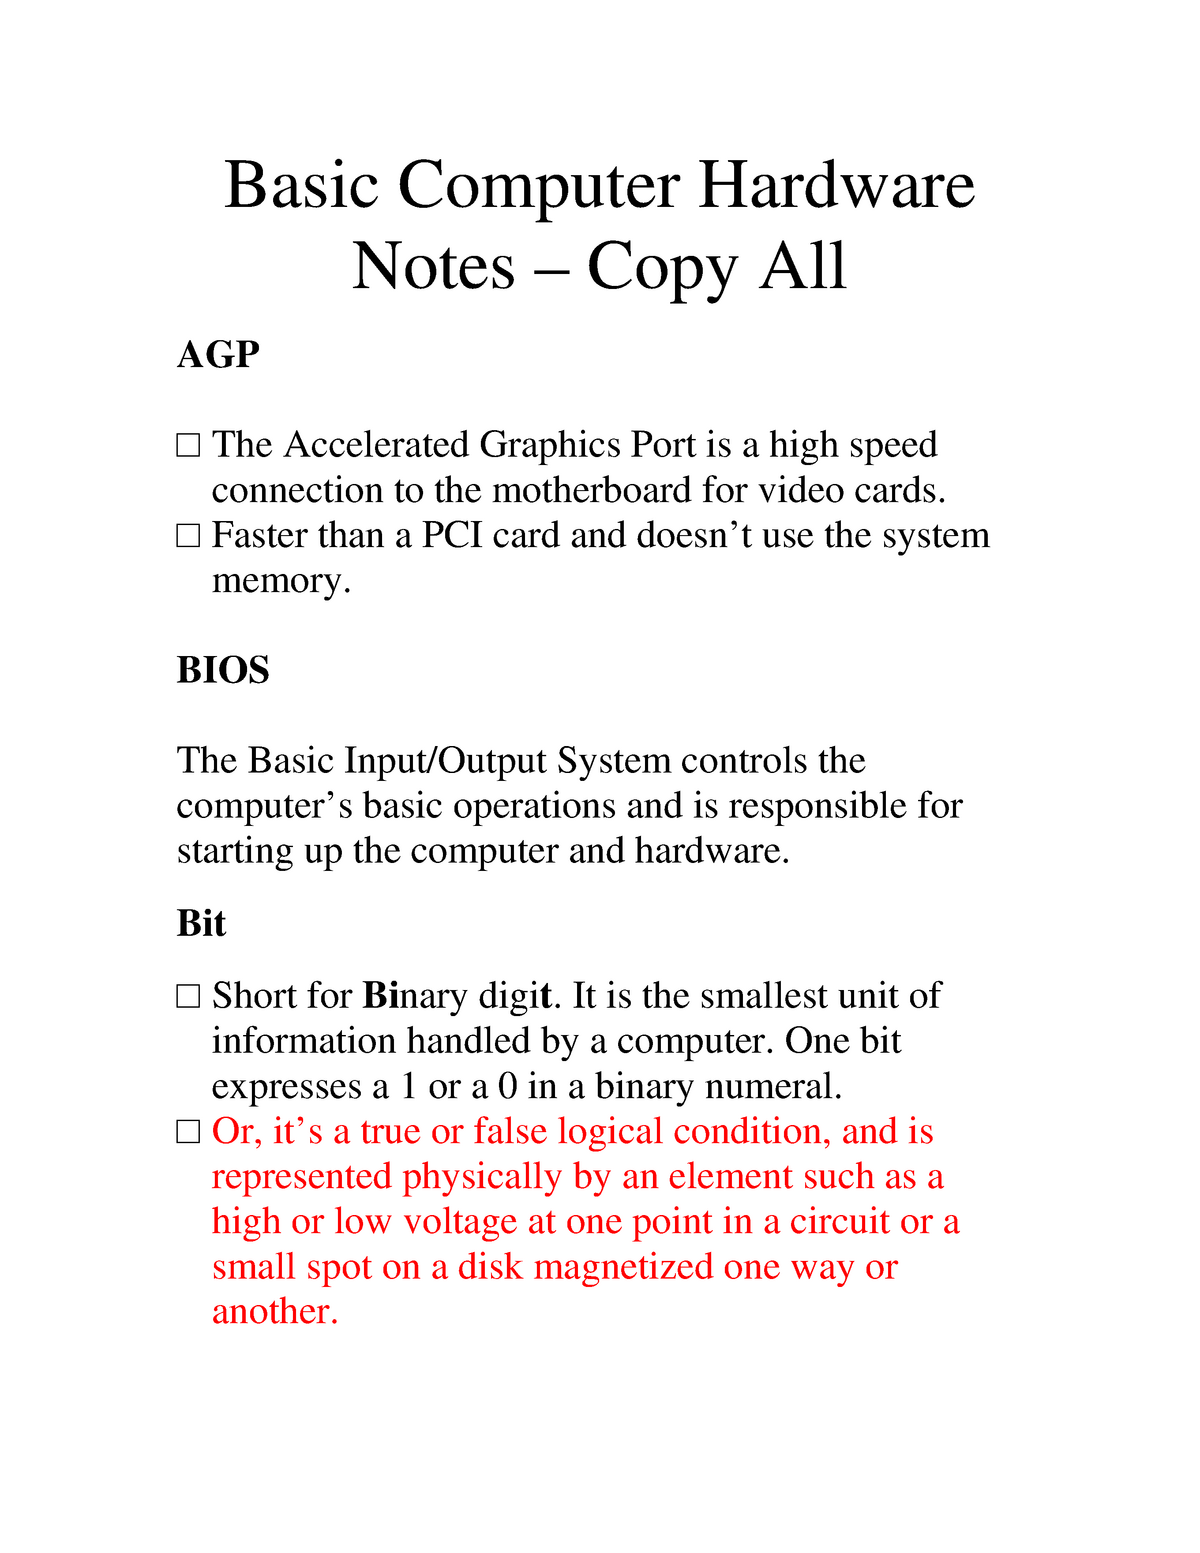 research paper on computer hardware